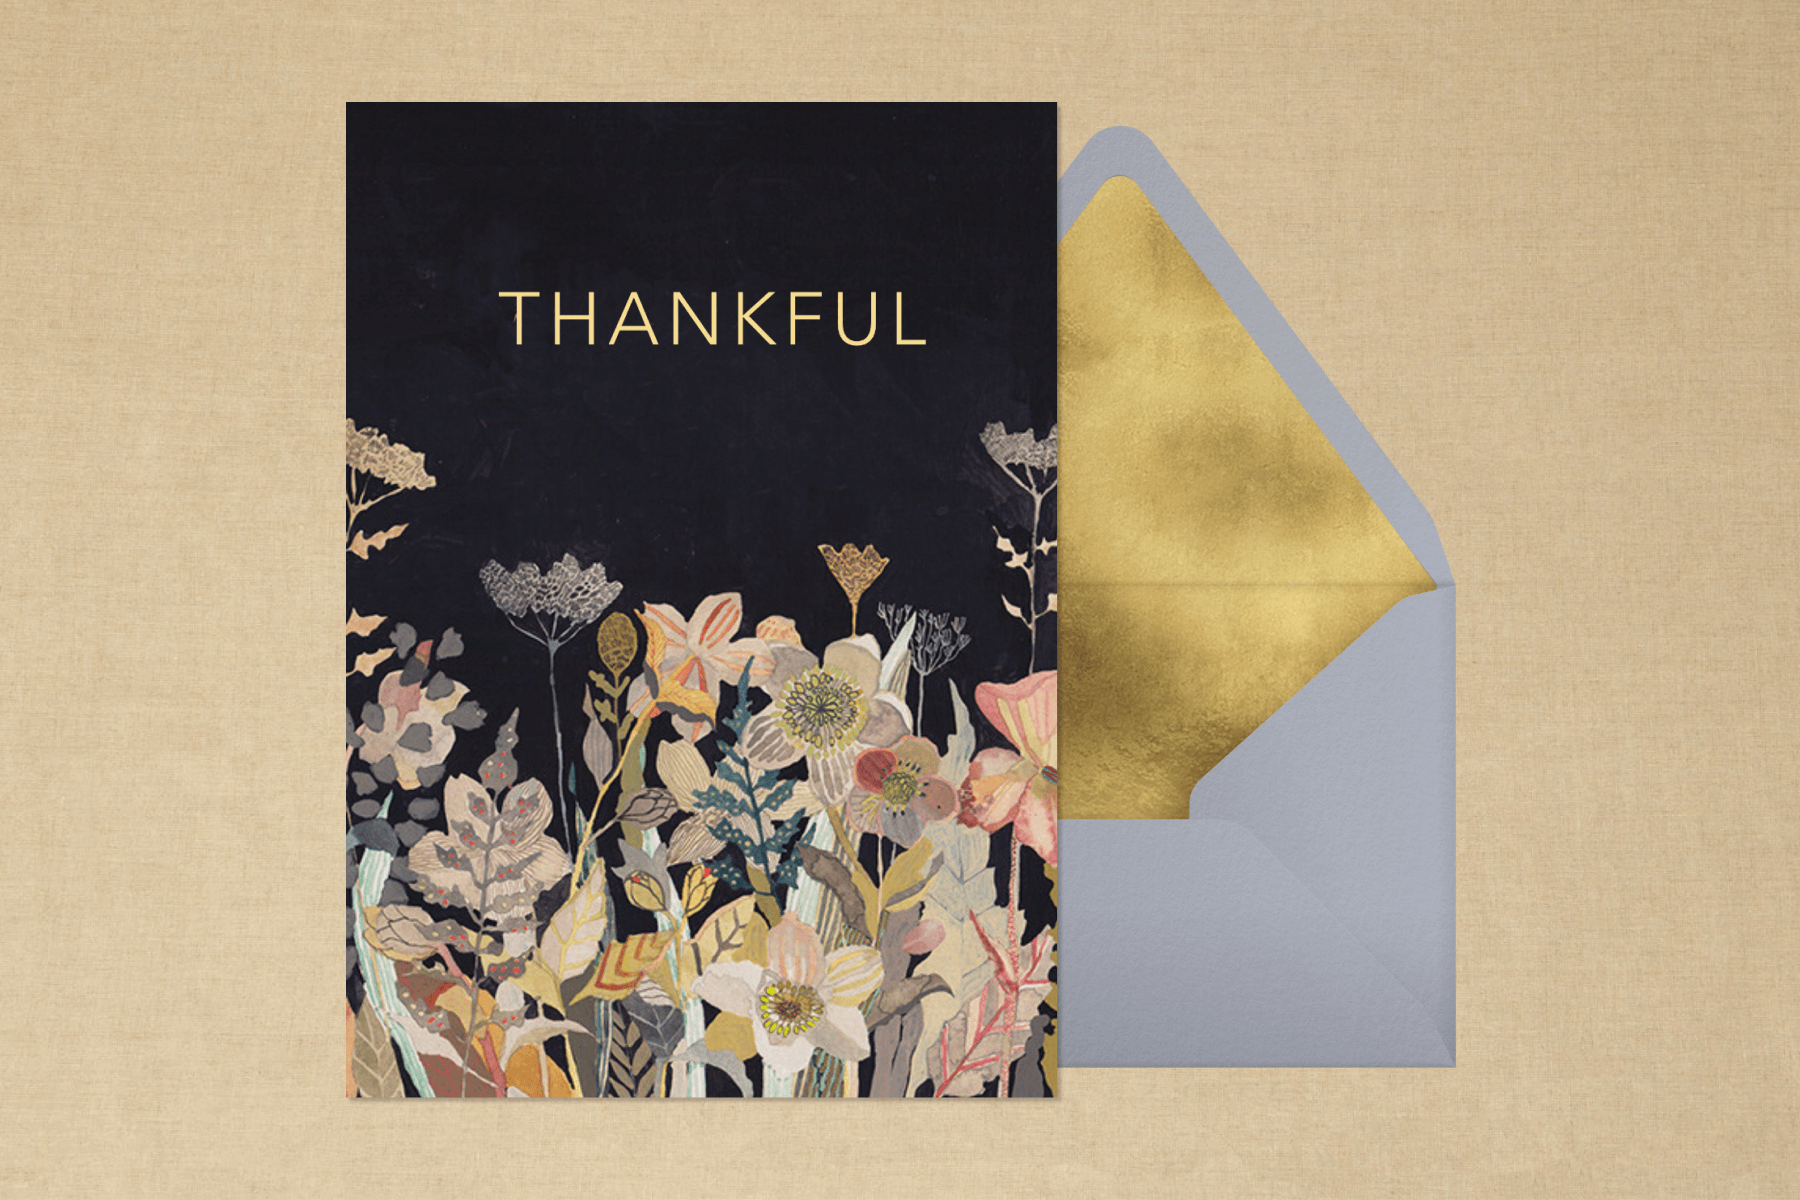 A black thank you card with illustrations of pastel flowers and the word “Thankful.”